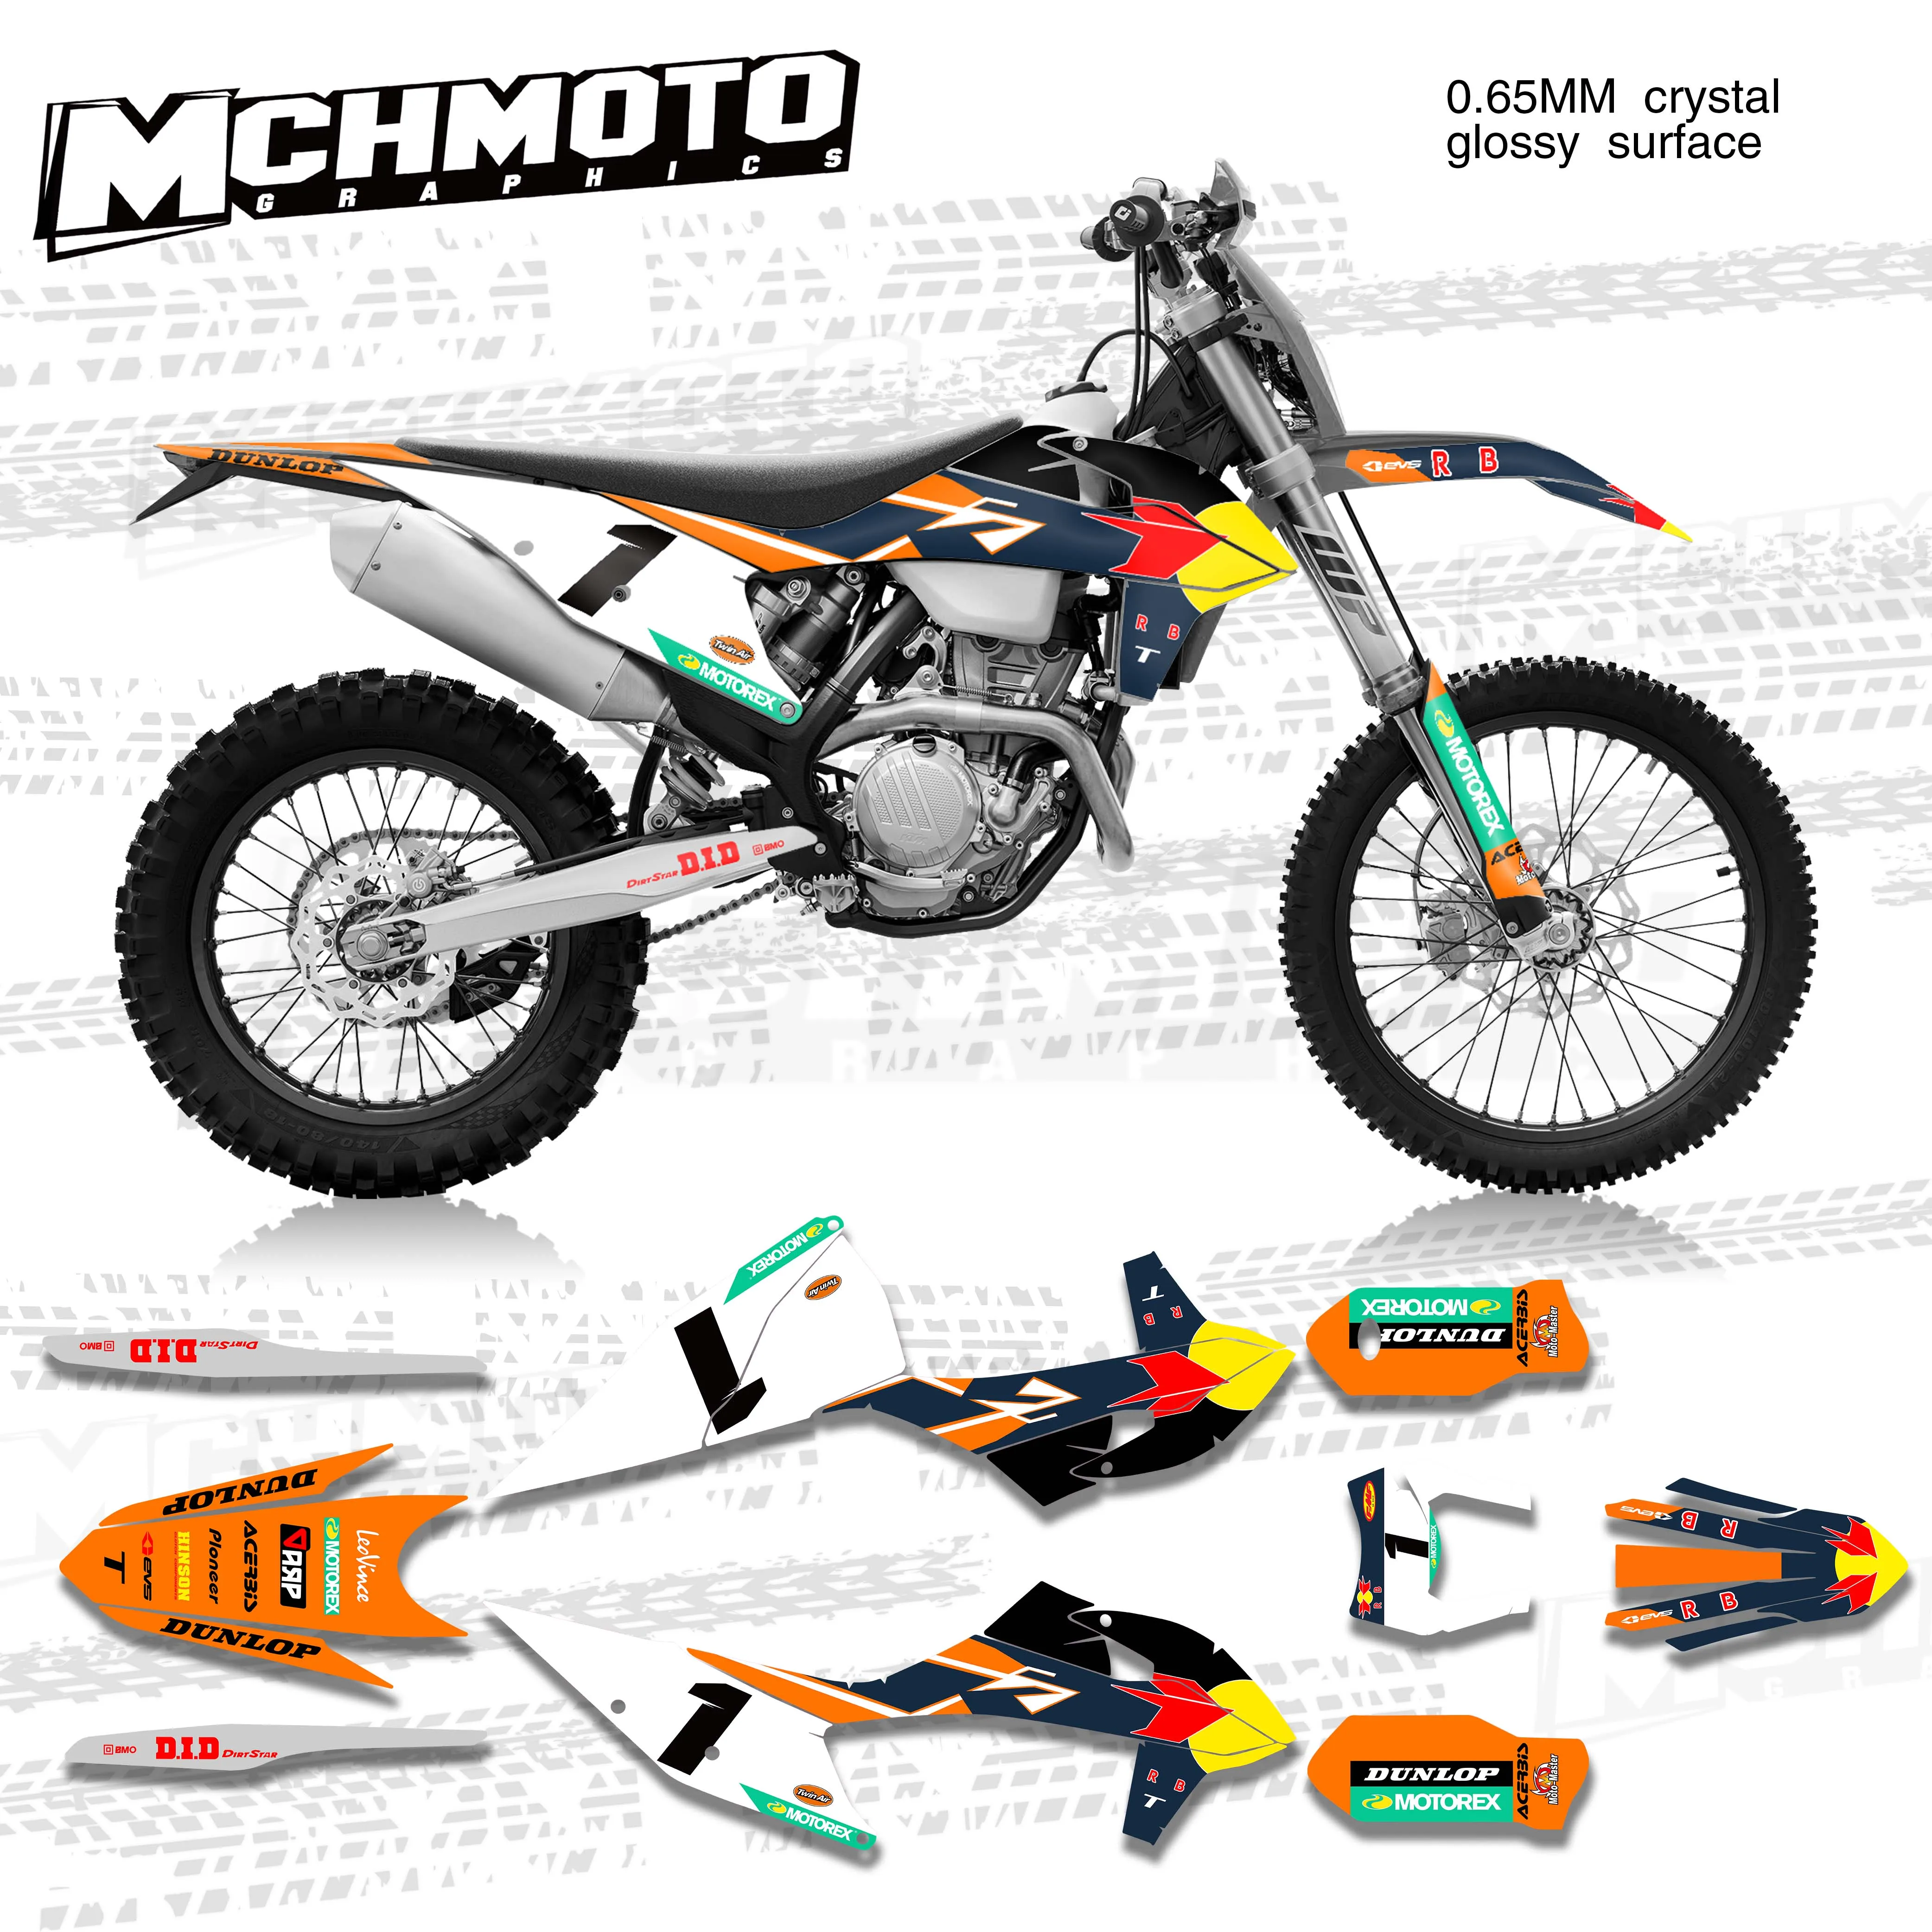 

MCHMFG Motorcycle Team Graphic Decals Stickers DECO Dekor For KTM EXC EXCF XC XCF 2020 2021 SX SXF 2019-2021 125 200 250 300 350